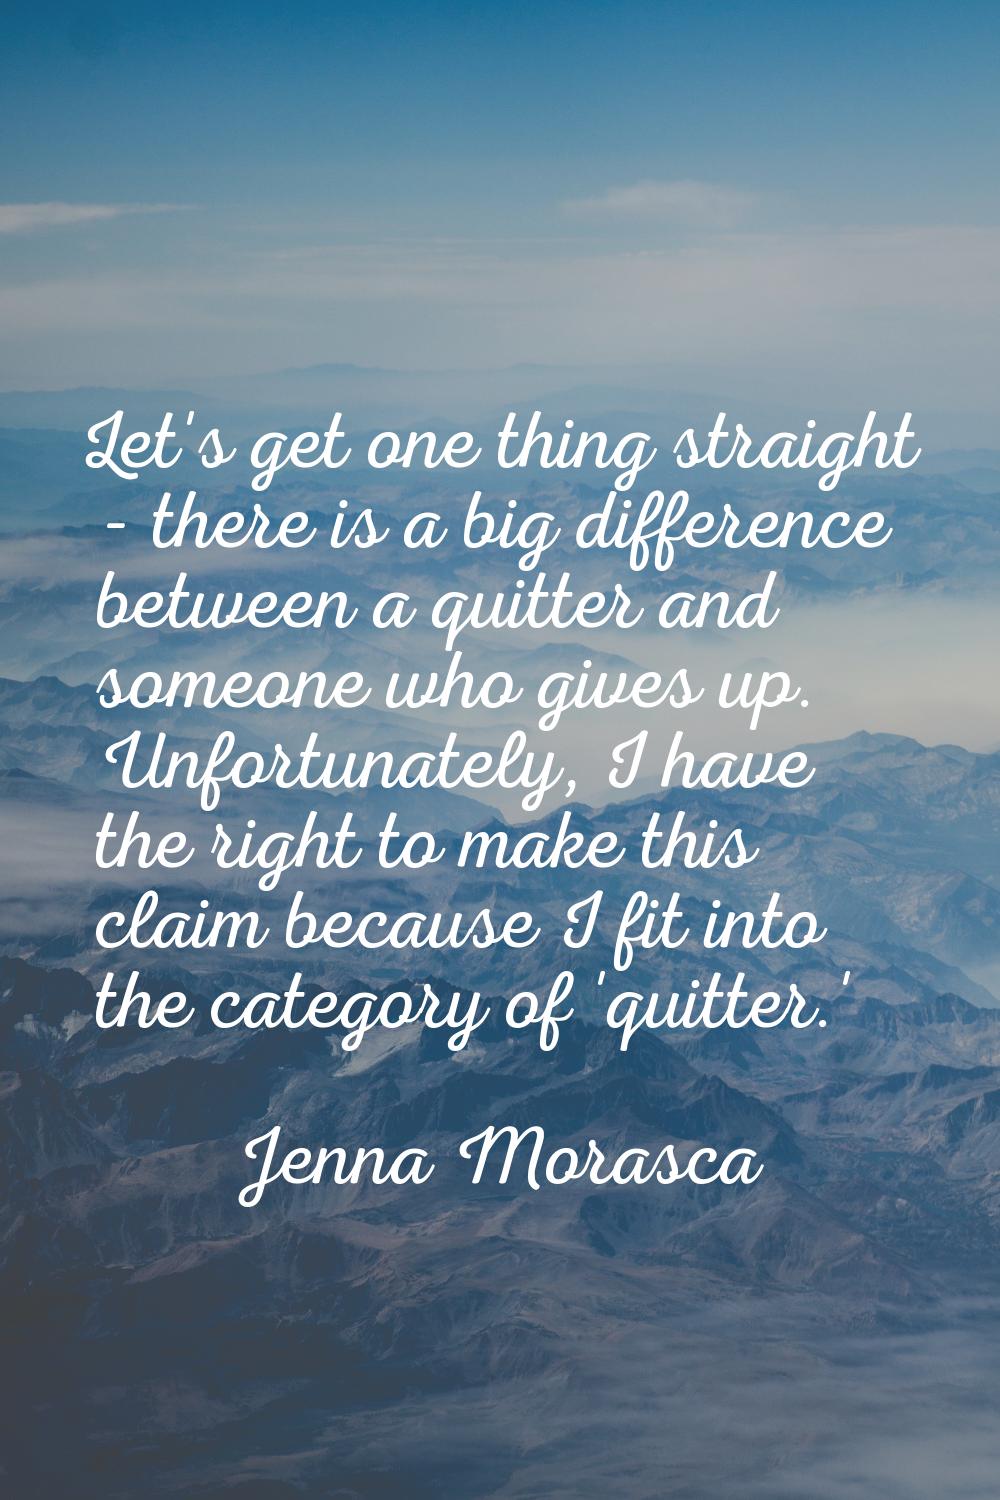 Let's get one thing straight - there is a big difference between a quitter and someone who gives up